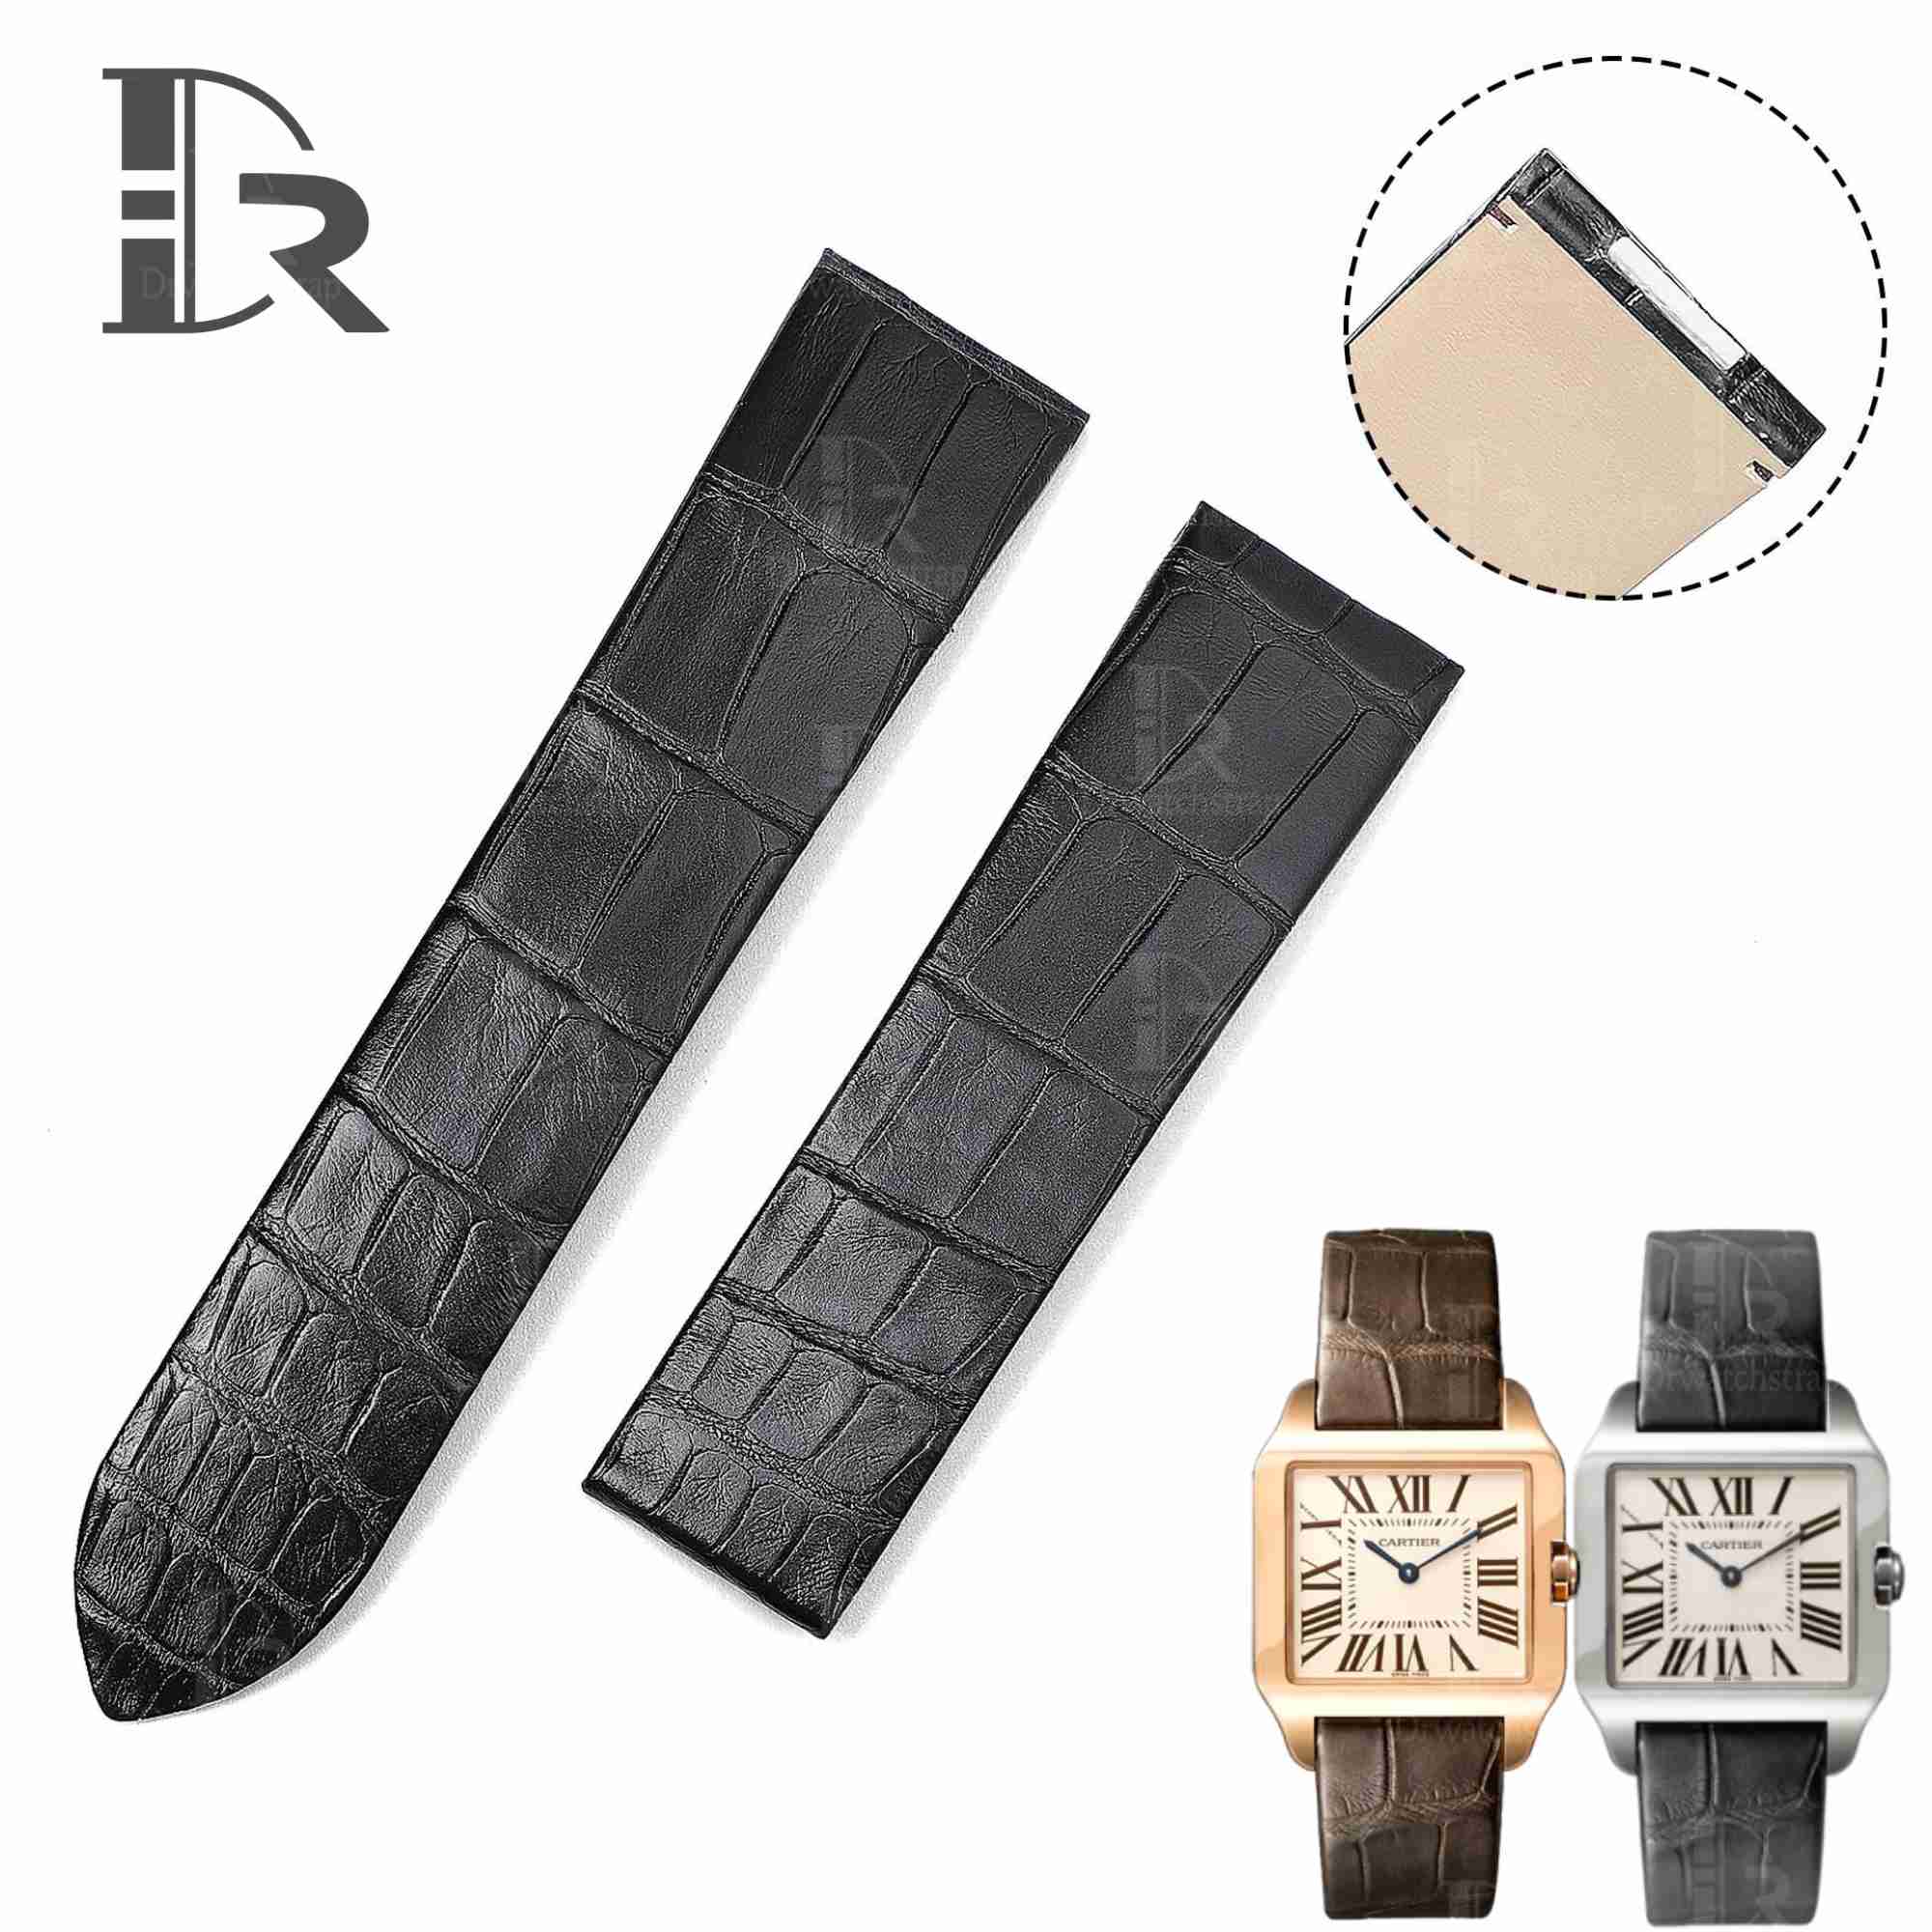 High-end genuine best quality OEM custom alligator leather black watch Cartier santos dumont strap and watch band replacement for Cartier Santos Dumont men's and women's watches for sale - Shop the premium Square-scale straps and watchbands at a low price